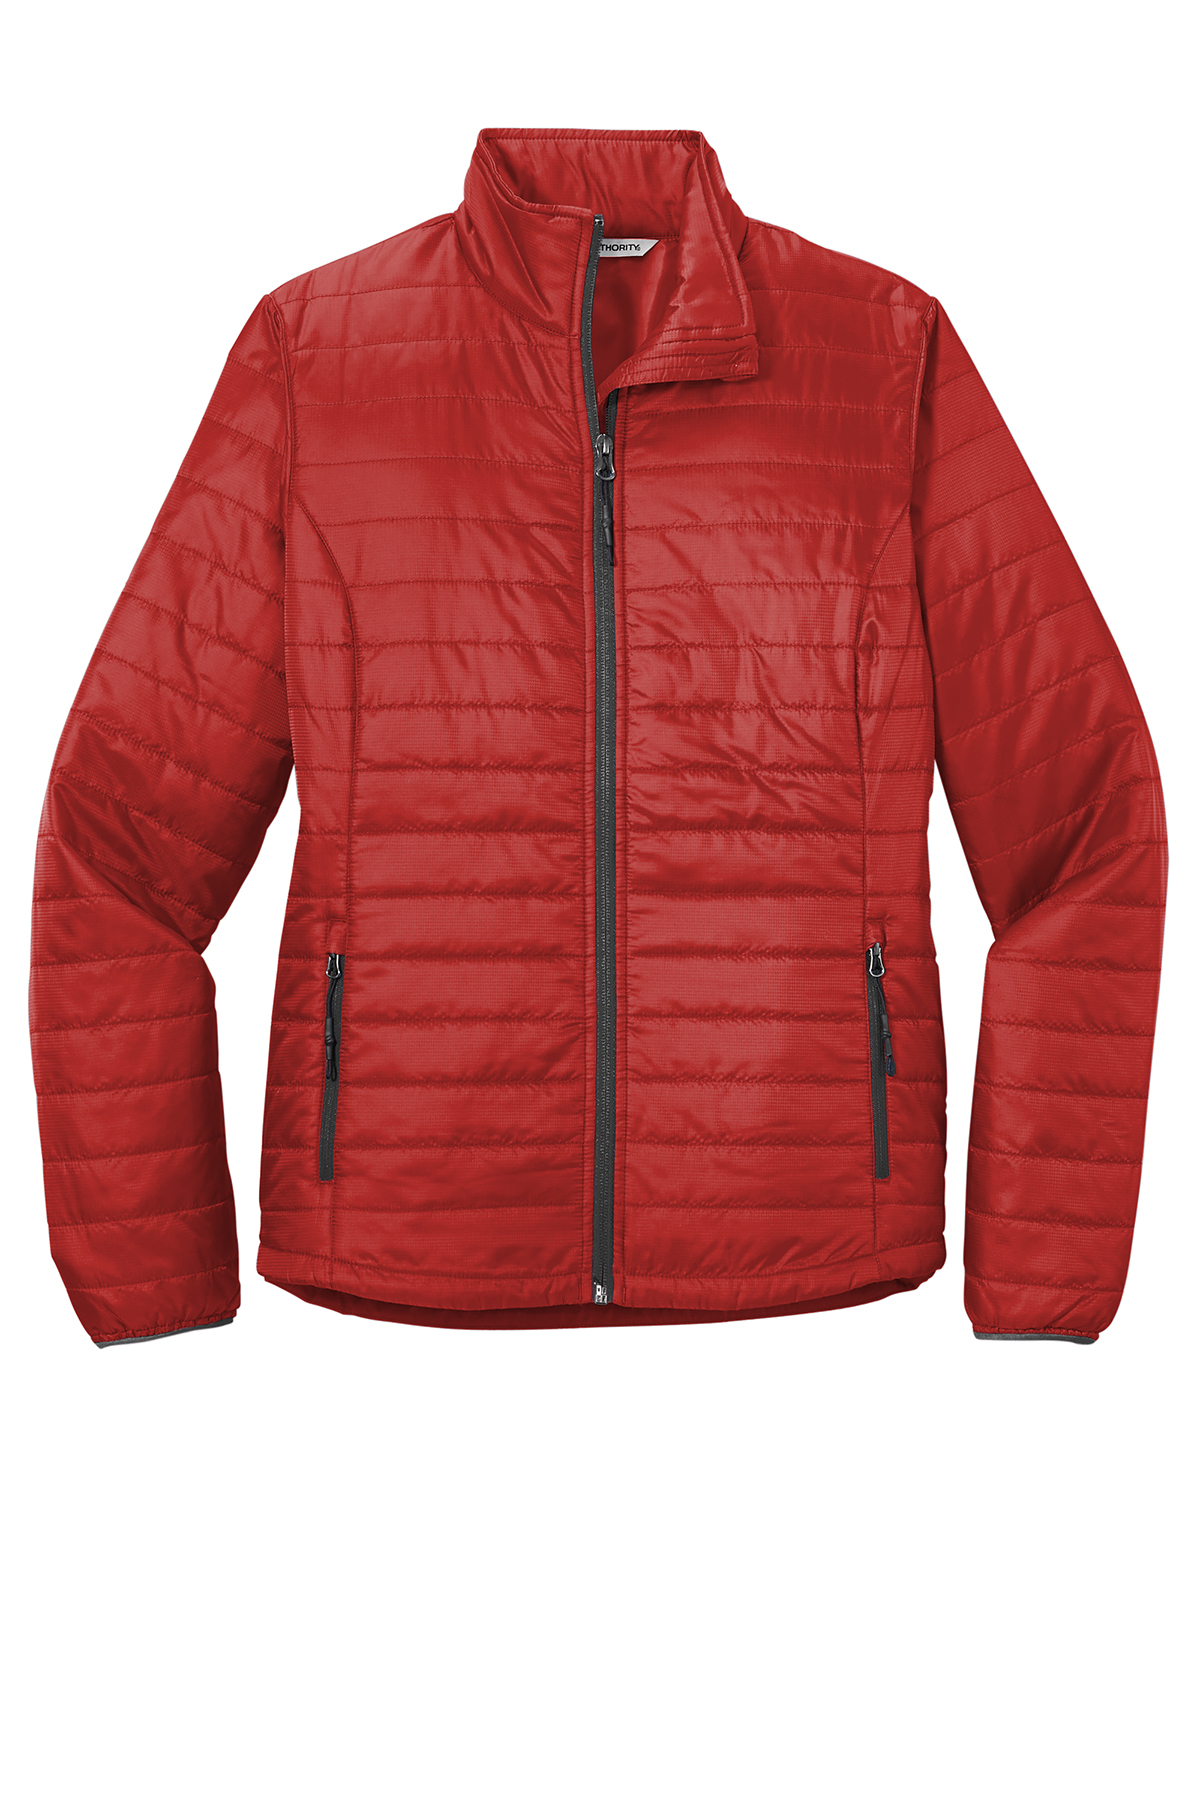 Port Authority Ladies Packable Puffy Jacket | Product | SanMar